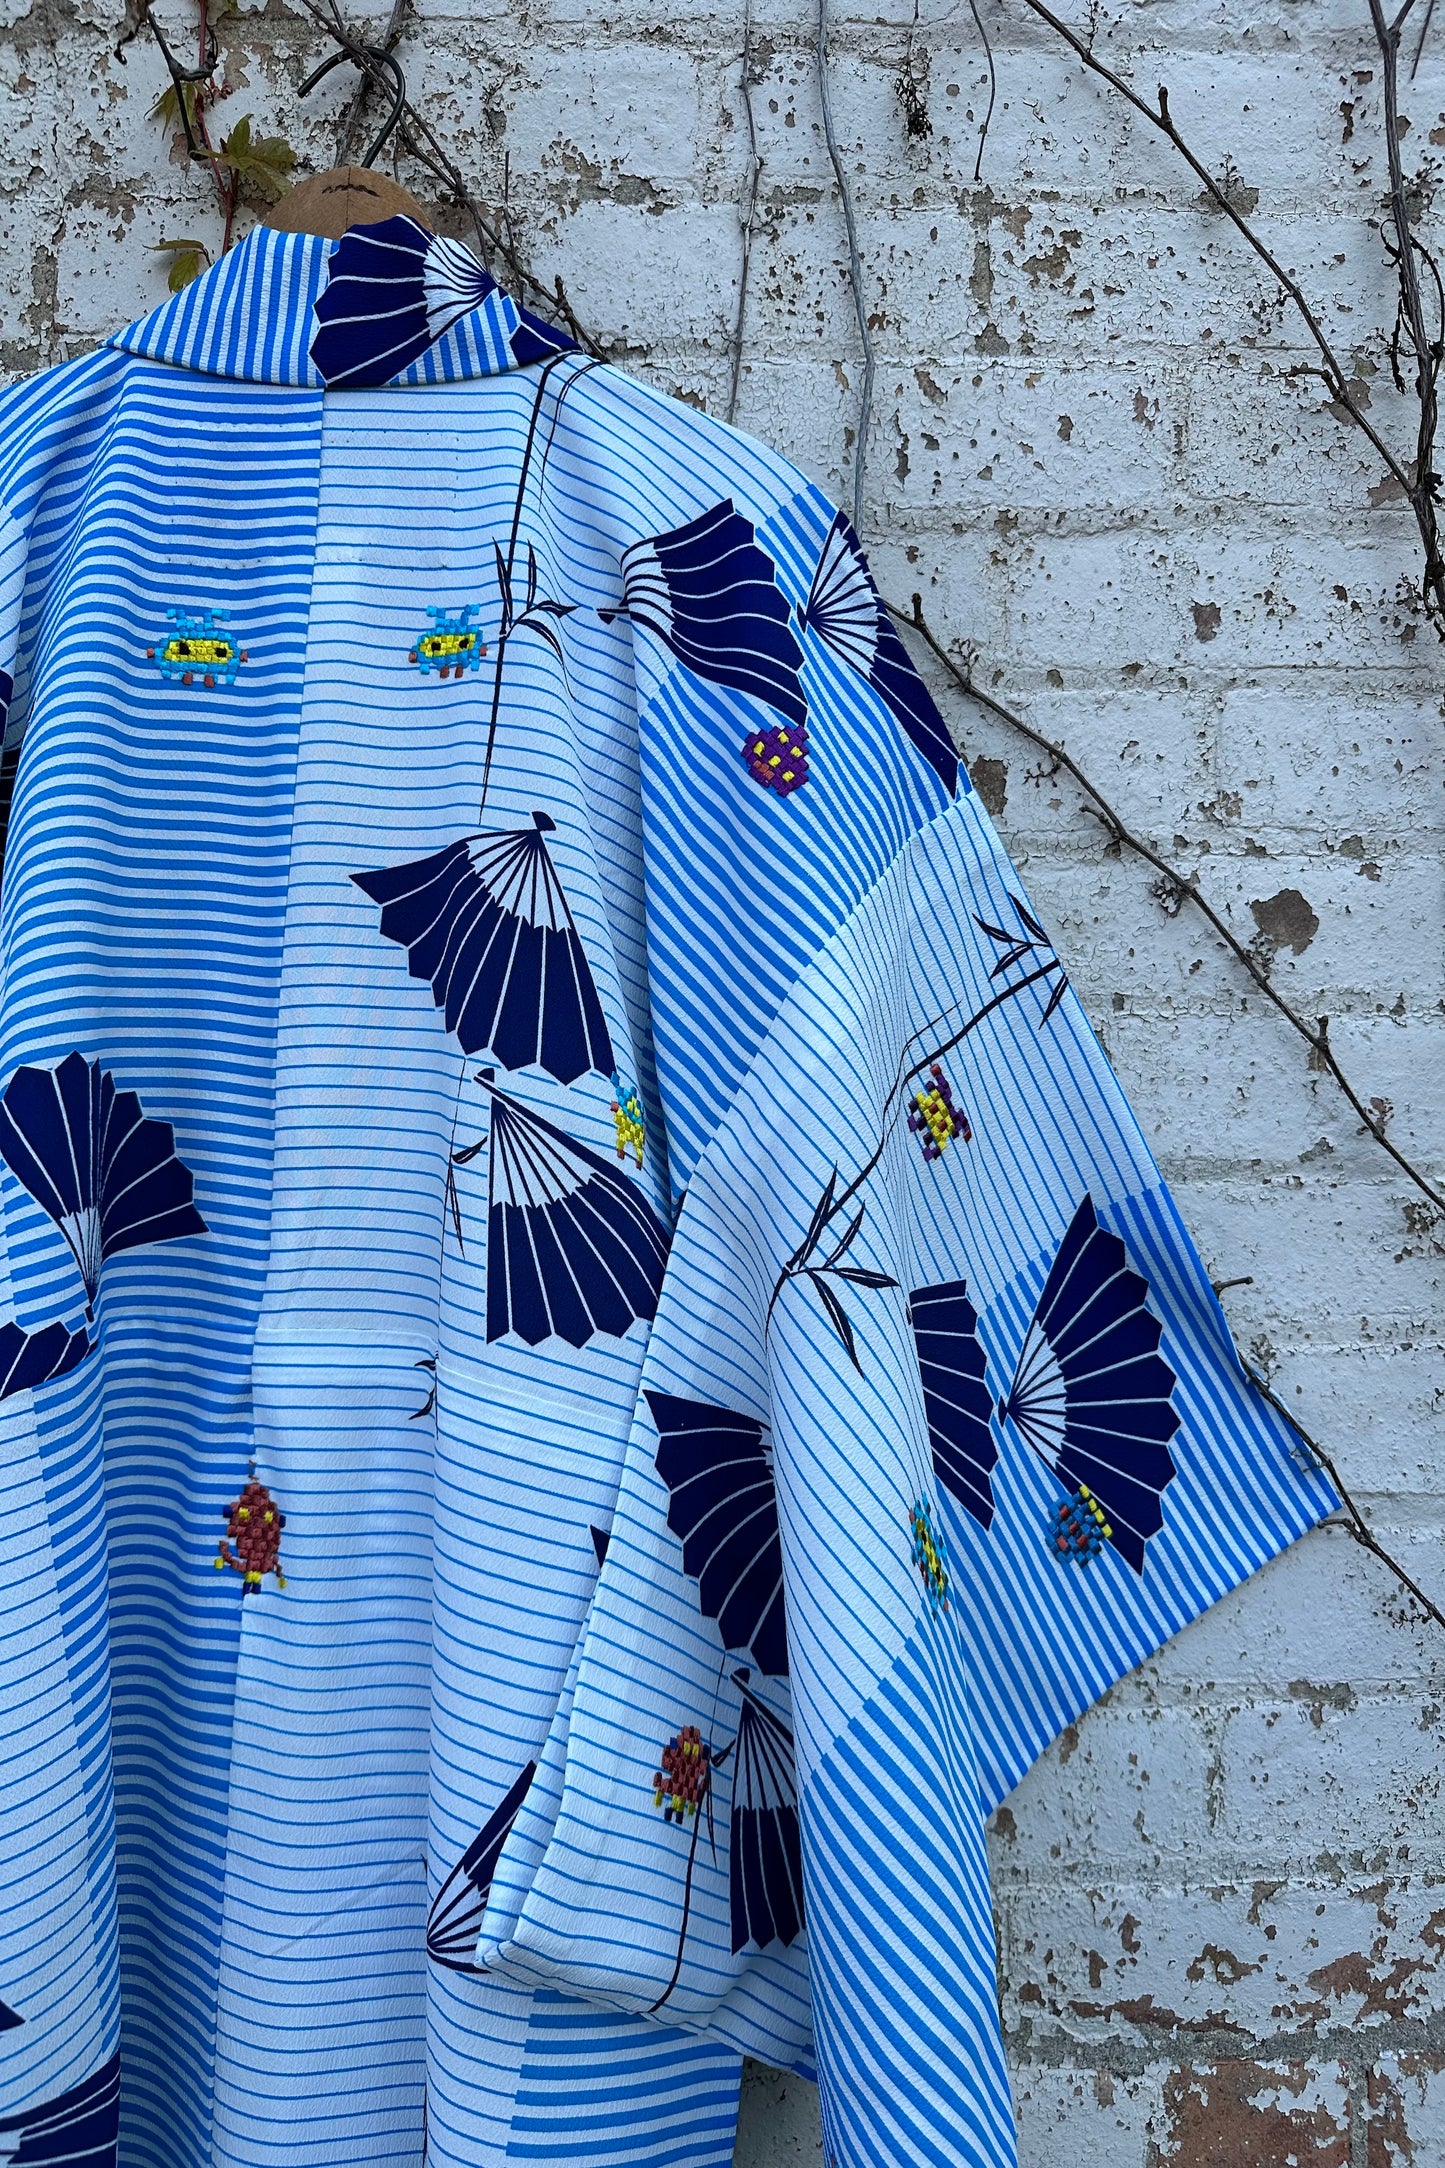 "Space Invaders" Kimono- Fans and Stripes